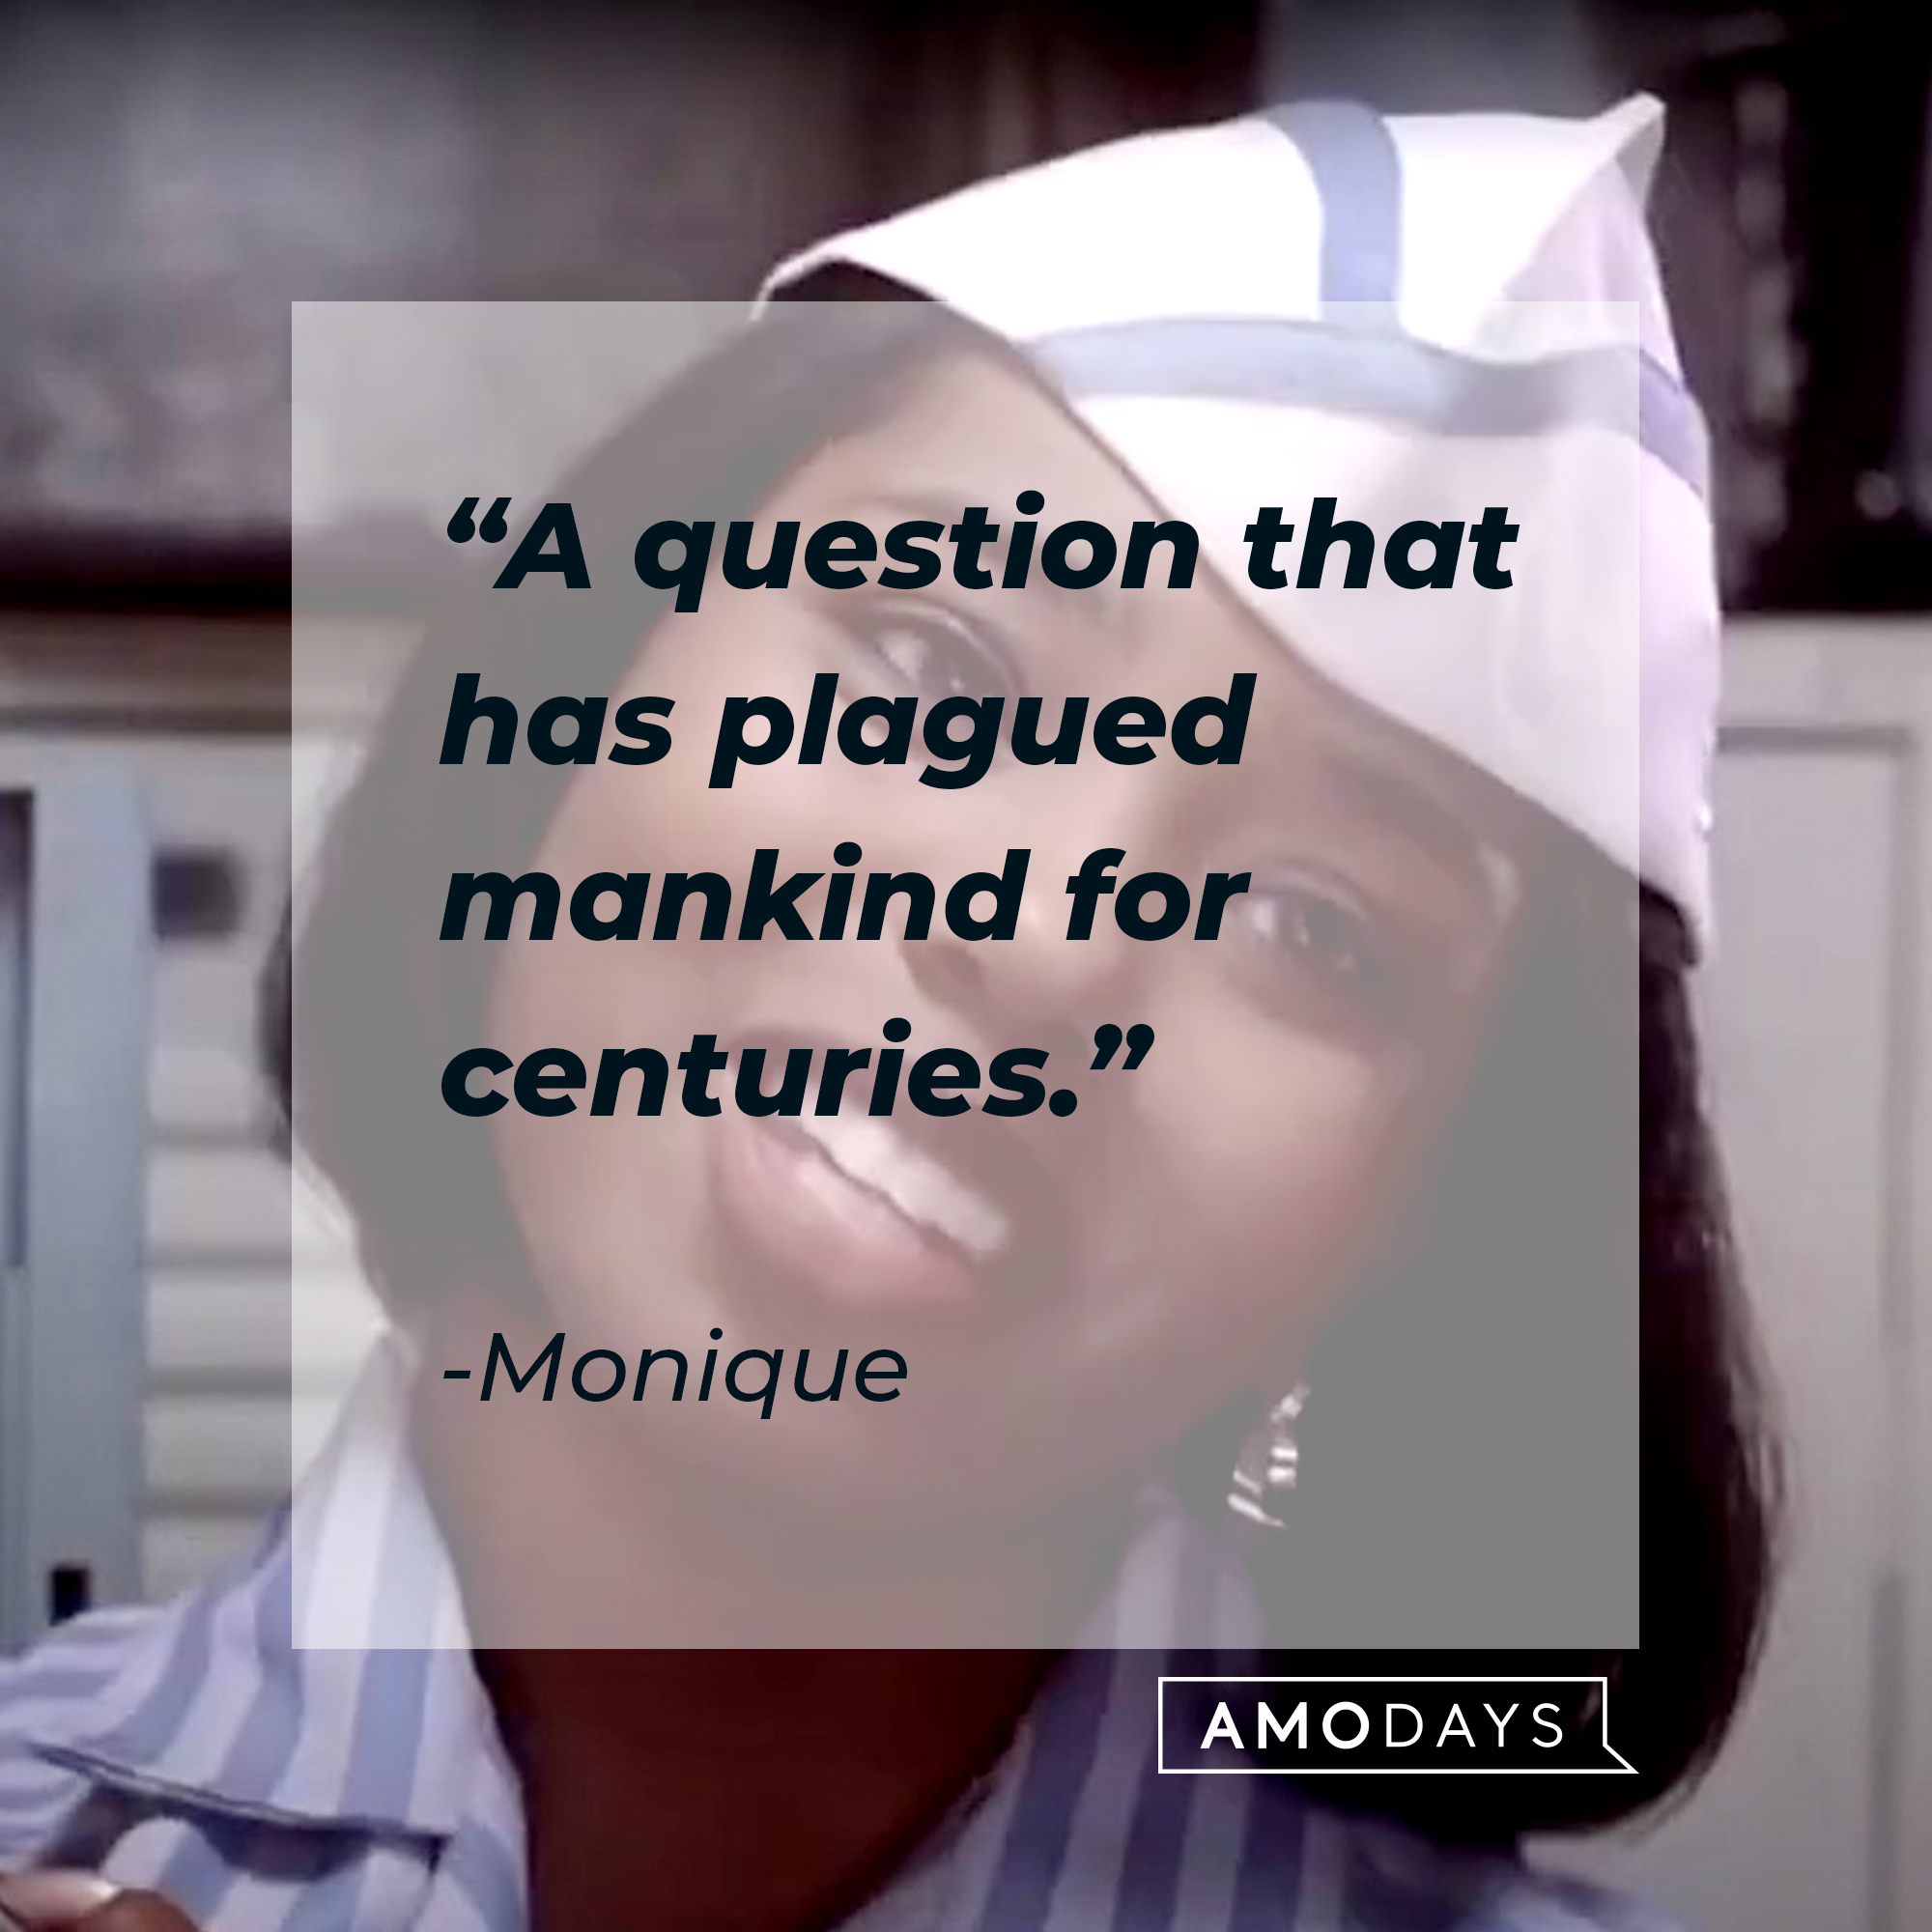 An image of Monique with her quote: “A question that has plagued mankind for centuries.” | Source: AmoDays